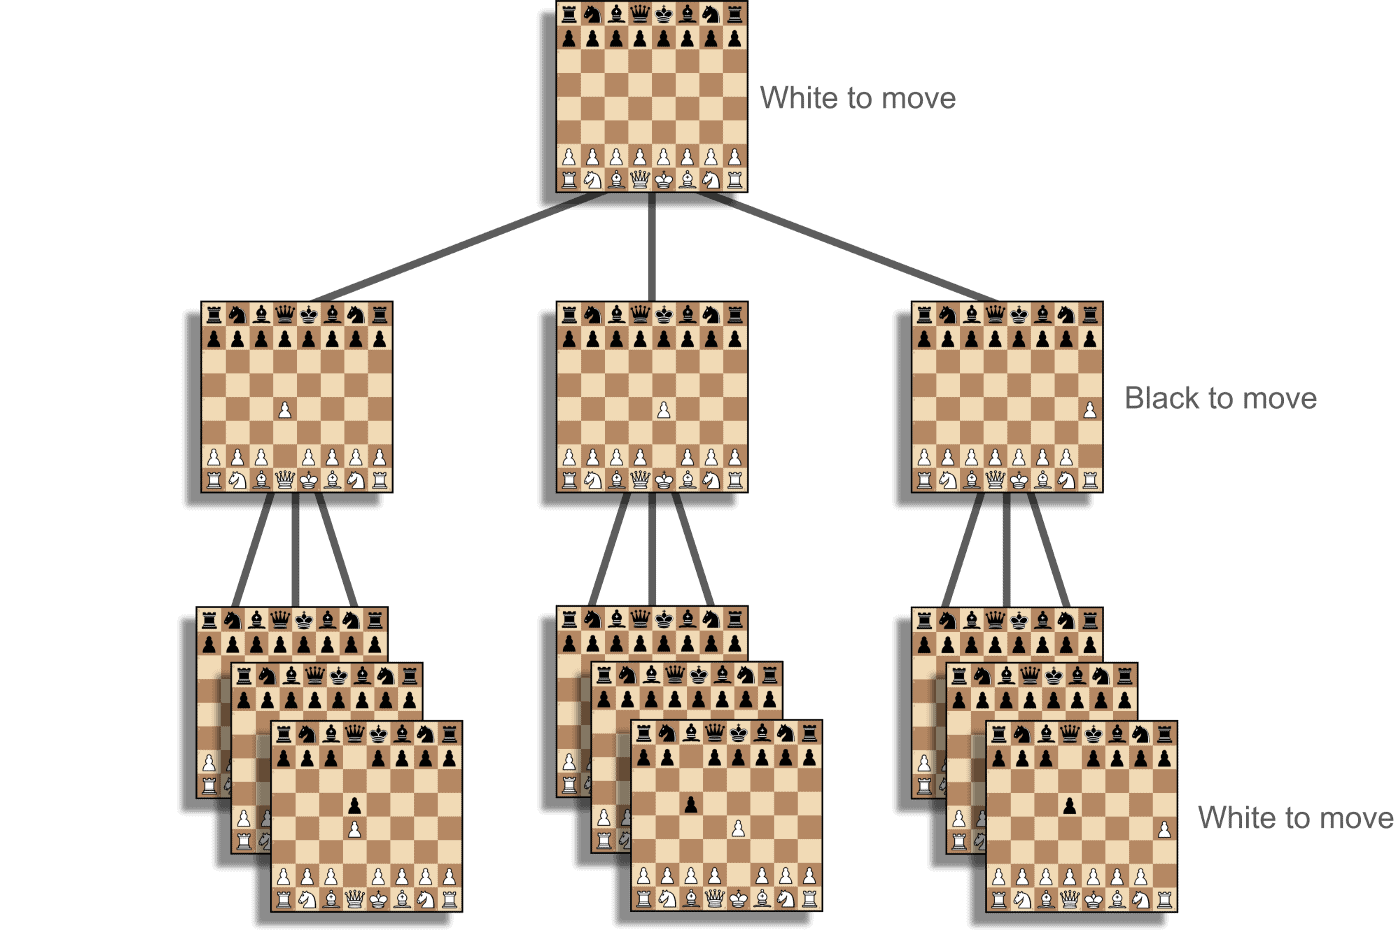 How Do Chess Engines Work? - Artificial Intelligence +